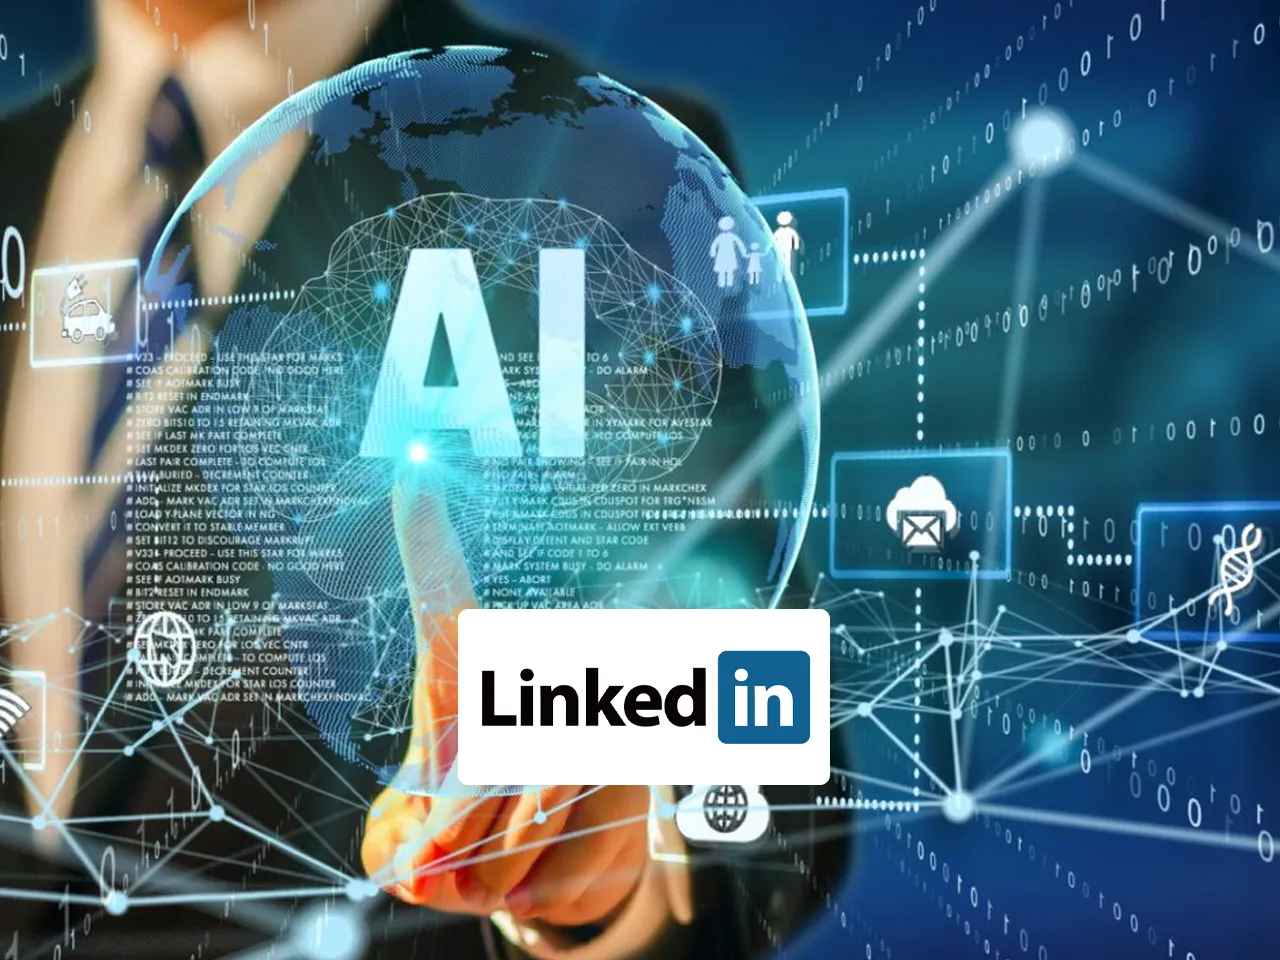 78% of marketers in India feel confident about using AI tools: LinkedIn report